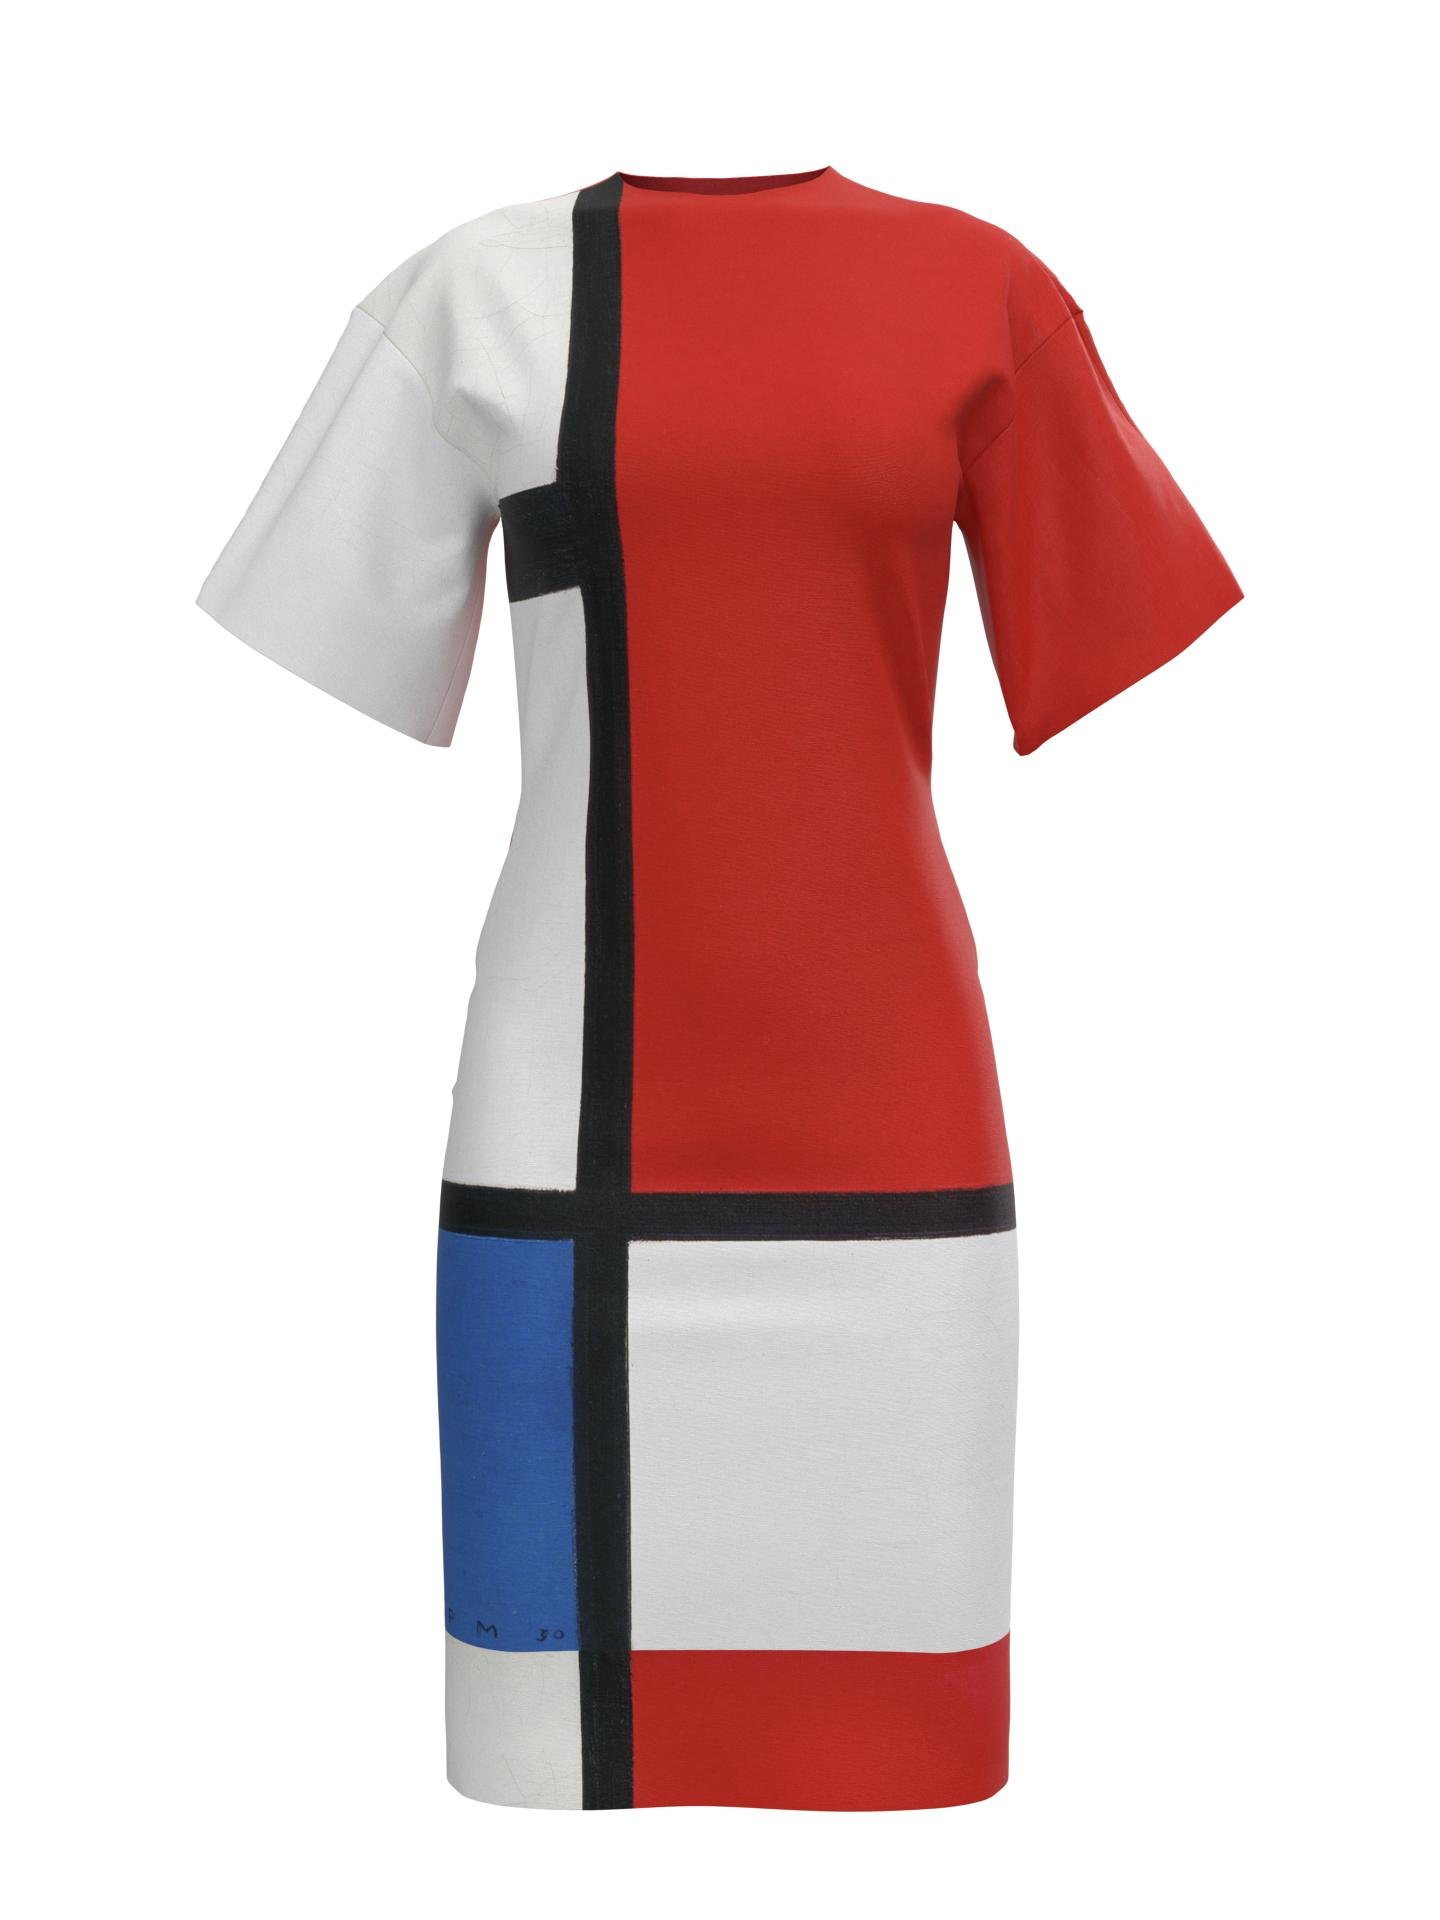 Dress-Composition with Red, Blue and Yellow by DRESSX